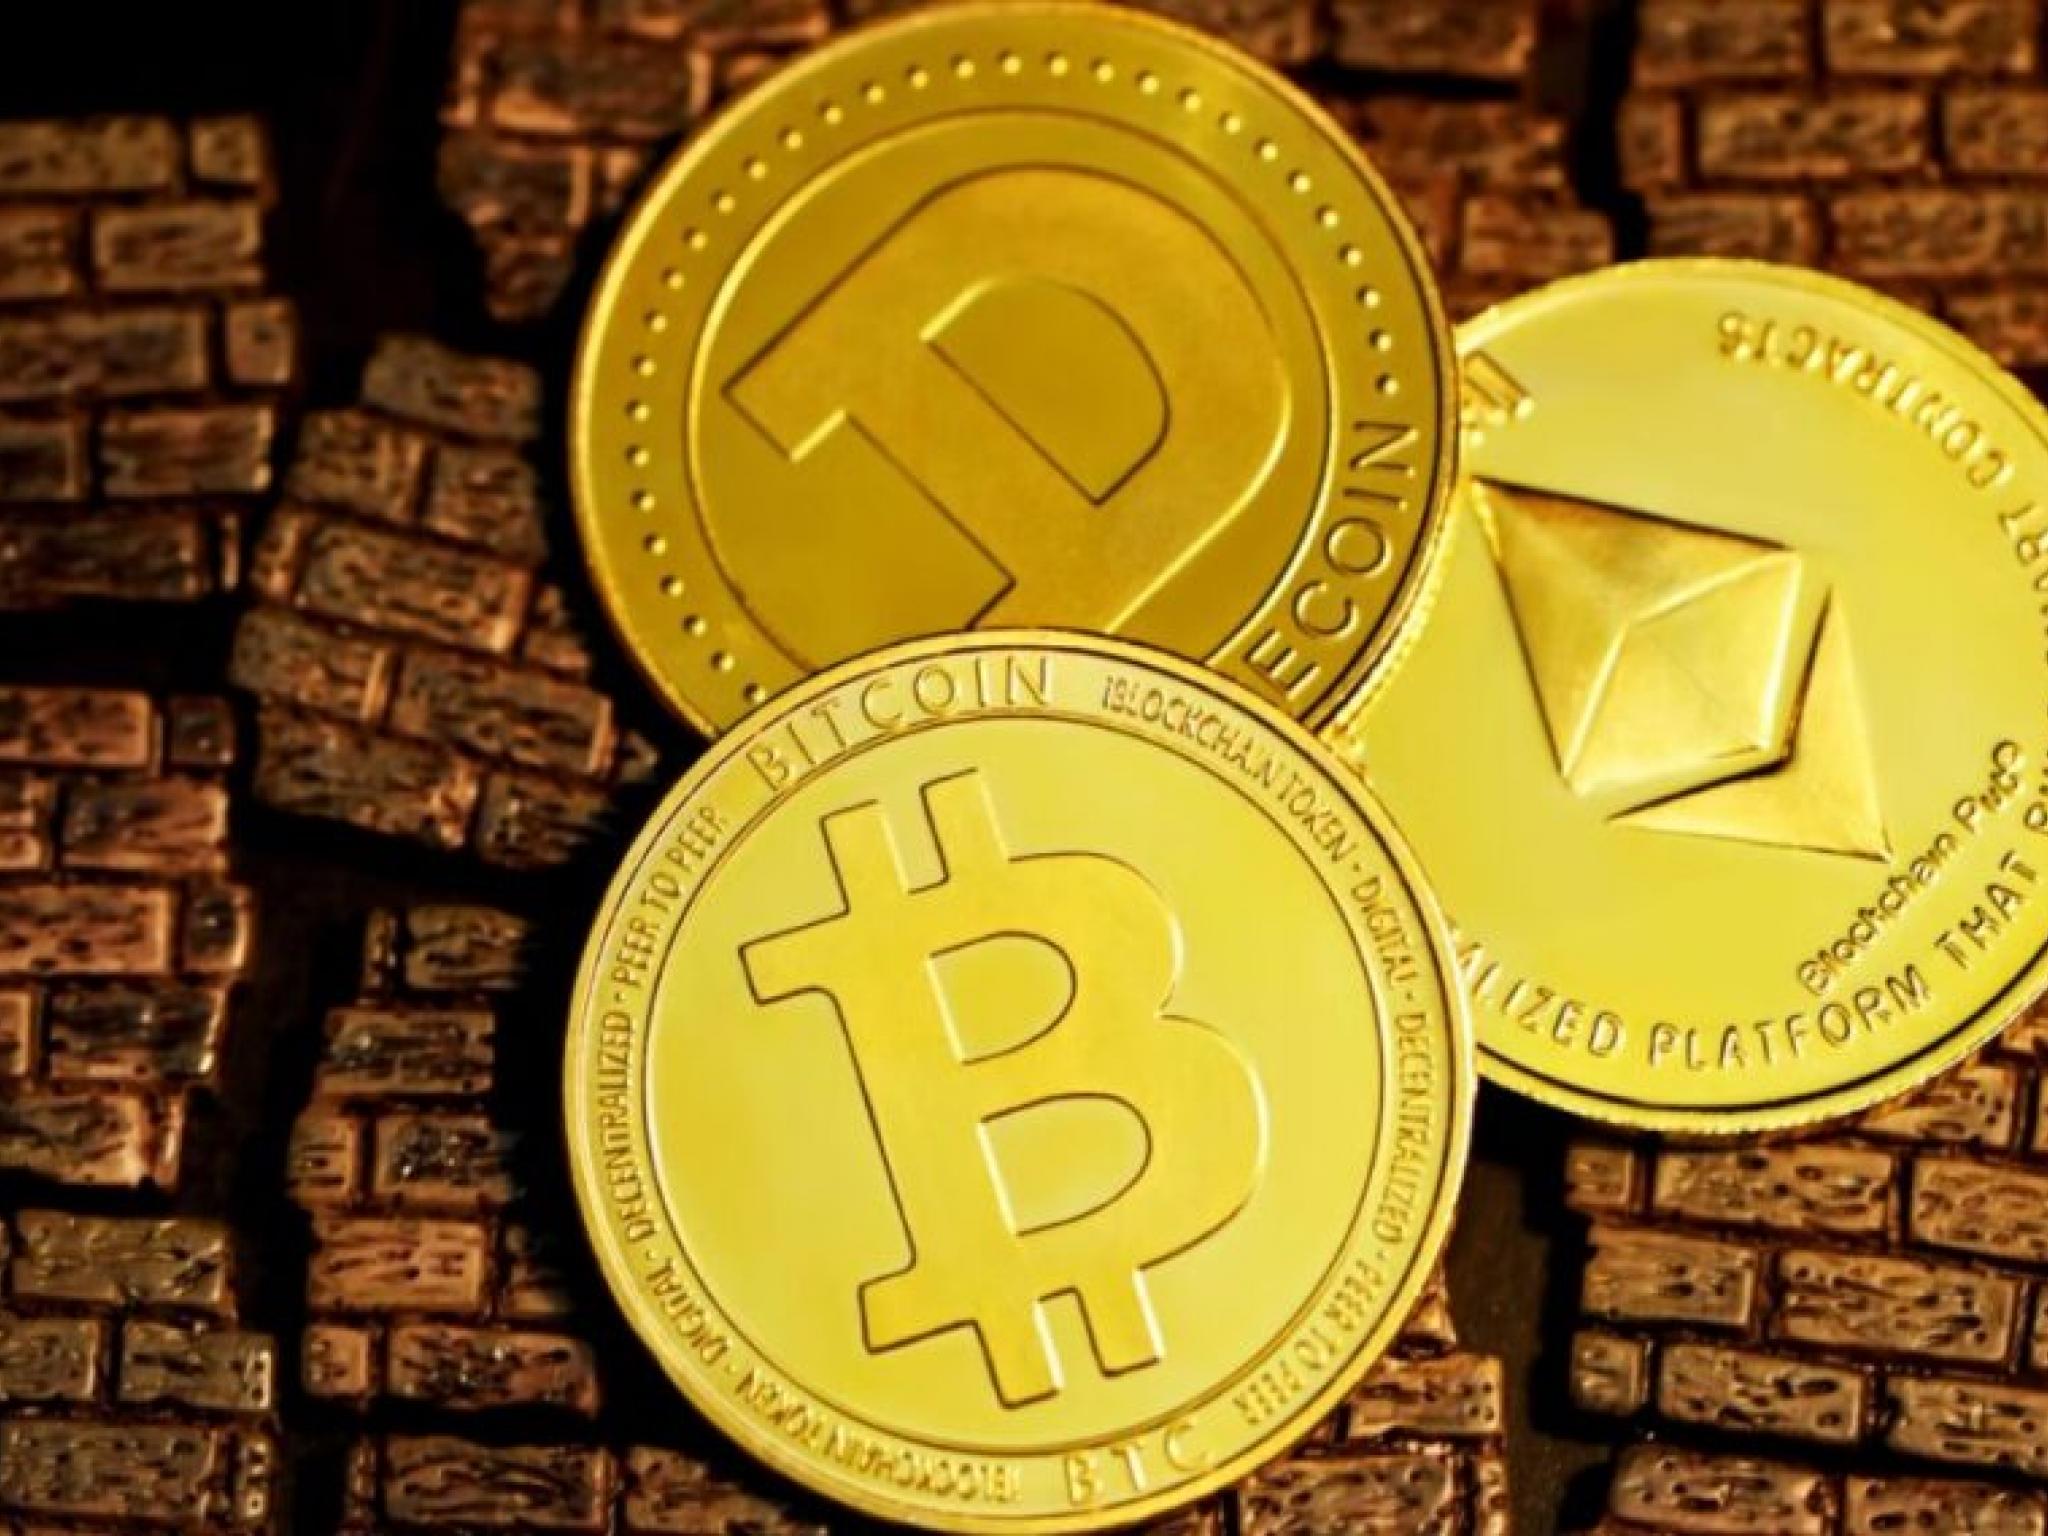  bitcoin-ethereum-dogecoin-gain-momentum-as-fresh-trading-week-starts-analyst-says-altcoin-market-bottoming-out-eyes-70k-for-btc-this-wee-boeing-labor-union-pushes-for-board-voice-report---top-headlines-today-while-us-was-sleeping 